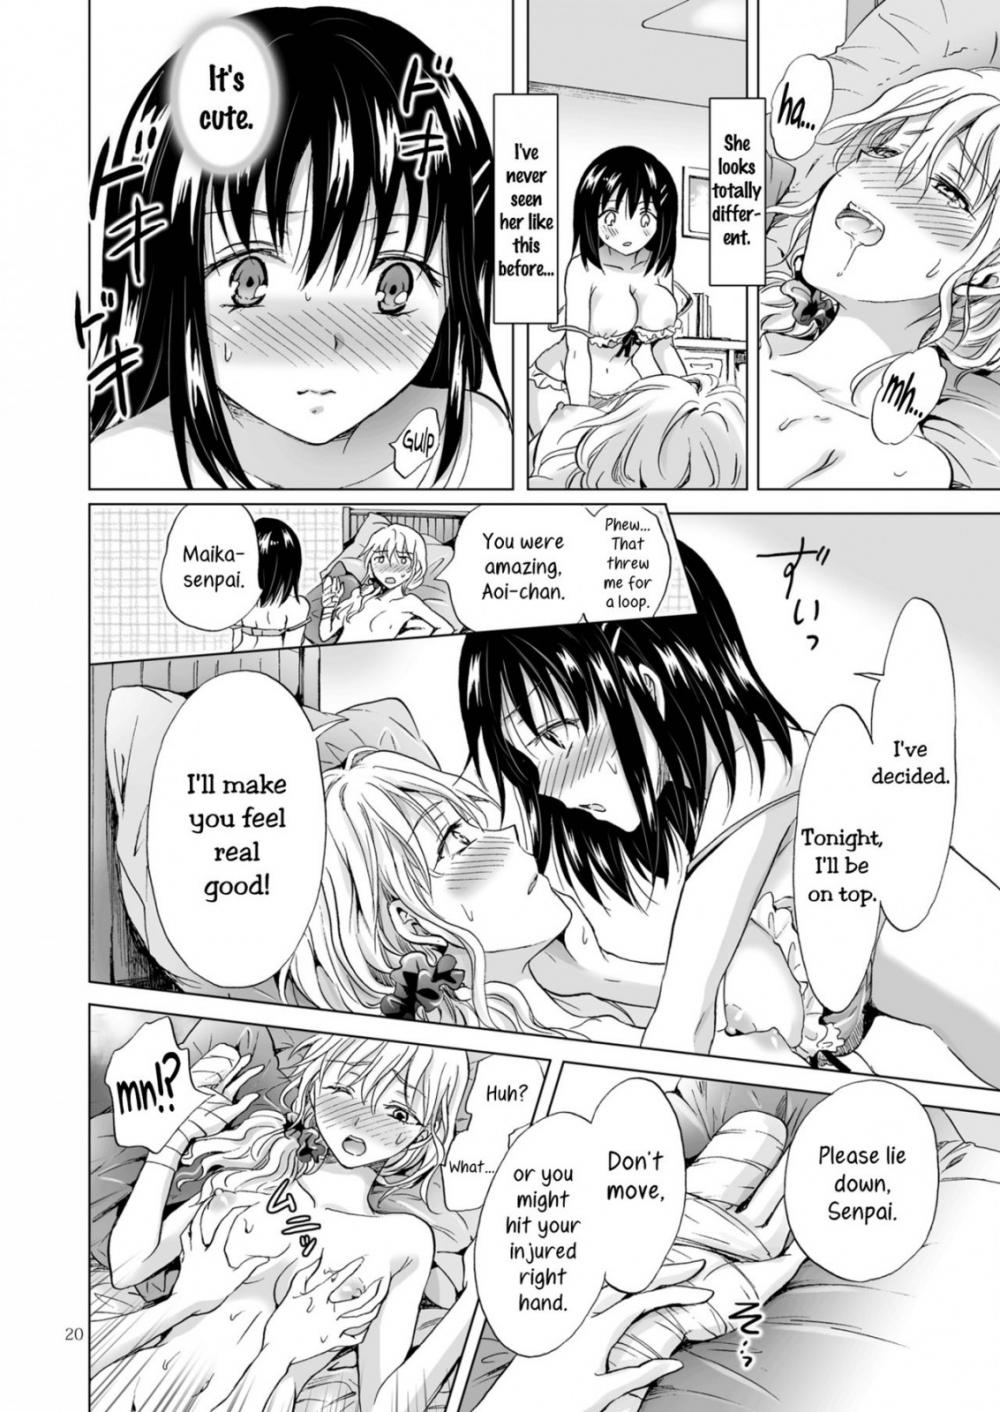 Top Manga Porn - Tonight I'll Be On Top-Read-Hentai Manga Hentai Comic - Page: 19 - Online  porn video at mobile